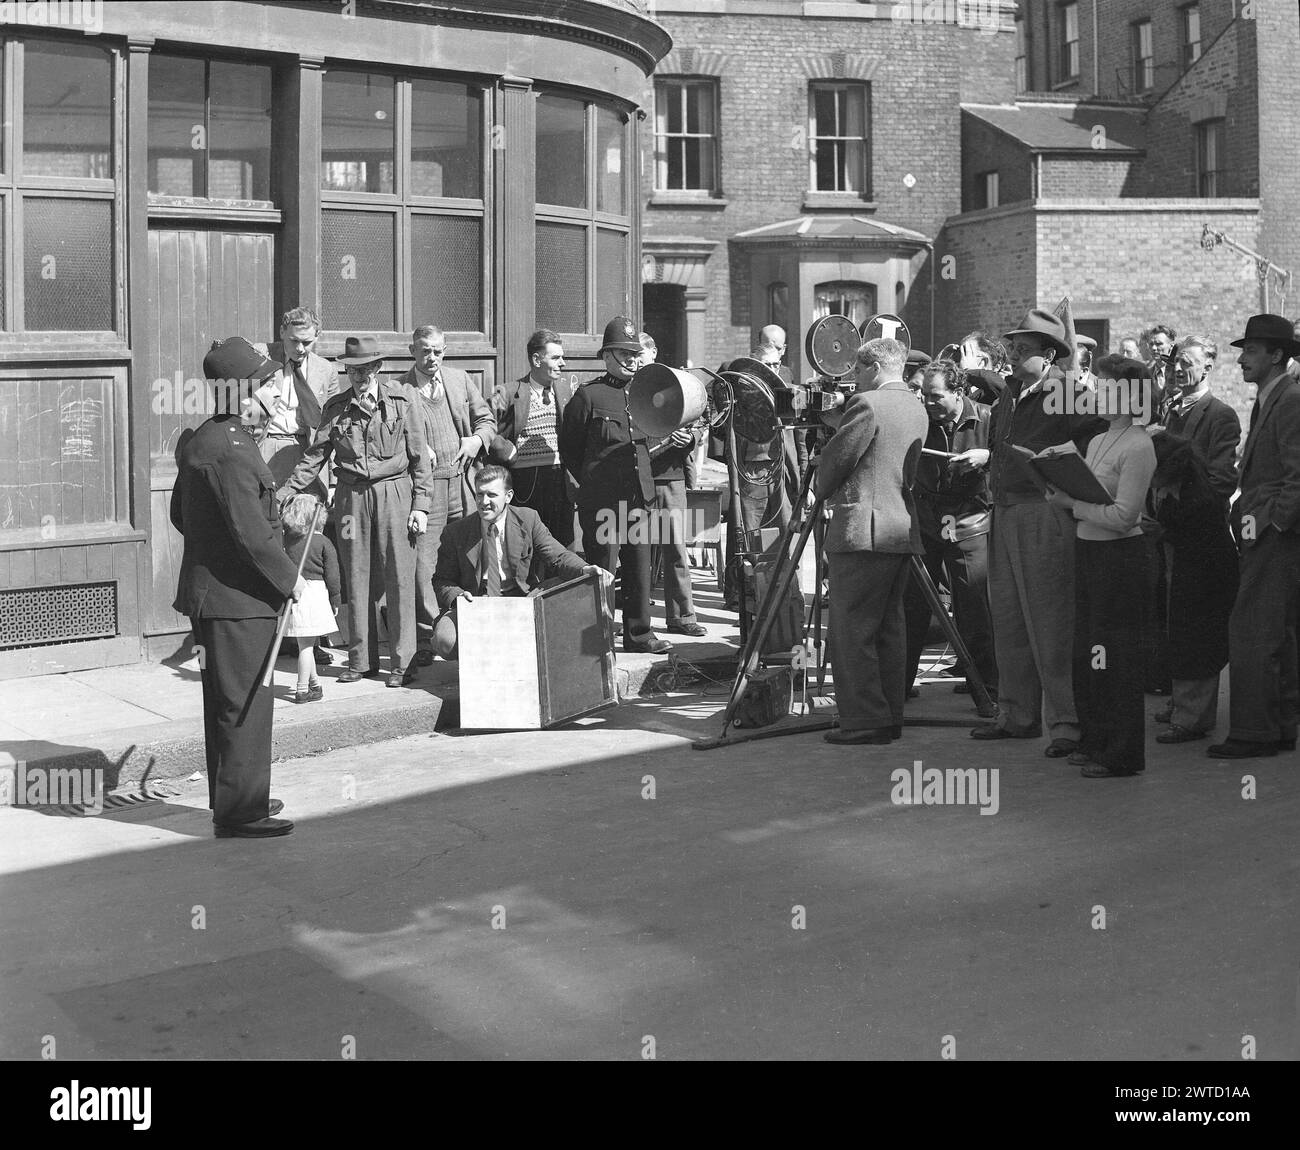 Filming the EALING comedy PASSPORT TO PIMLICO 1949 on location in a large bombsite in Lambeth Director HENRY CORNELIUS  Screenplay T.E.B. CLARKE Music GEORGES AURIC Ealing Studios Stock Photo